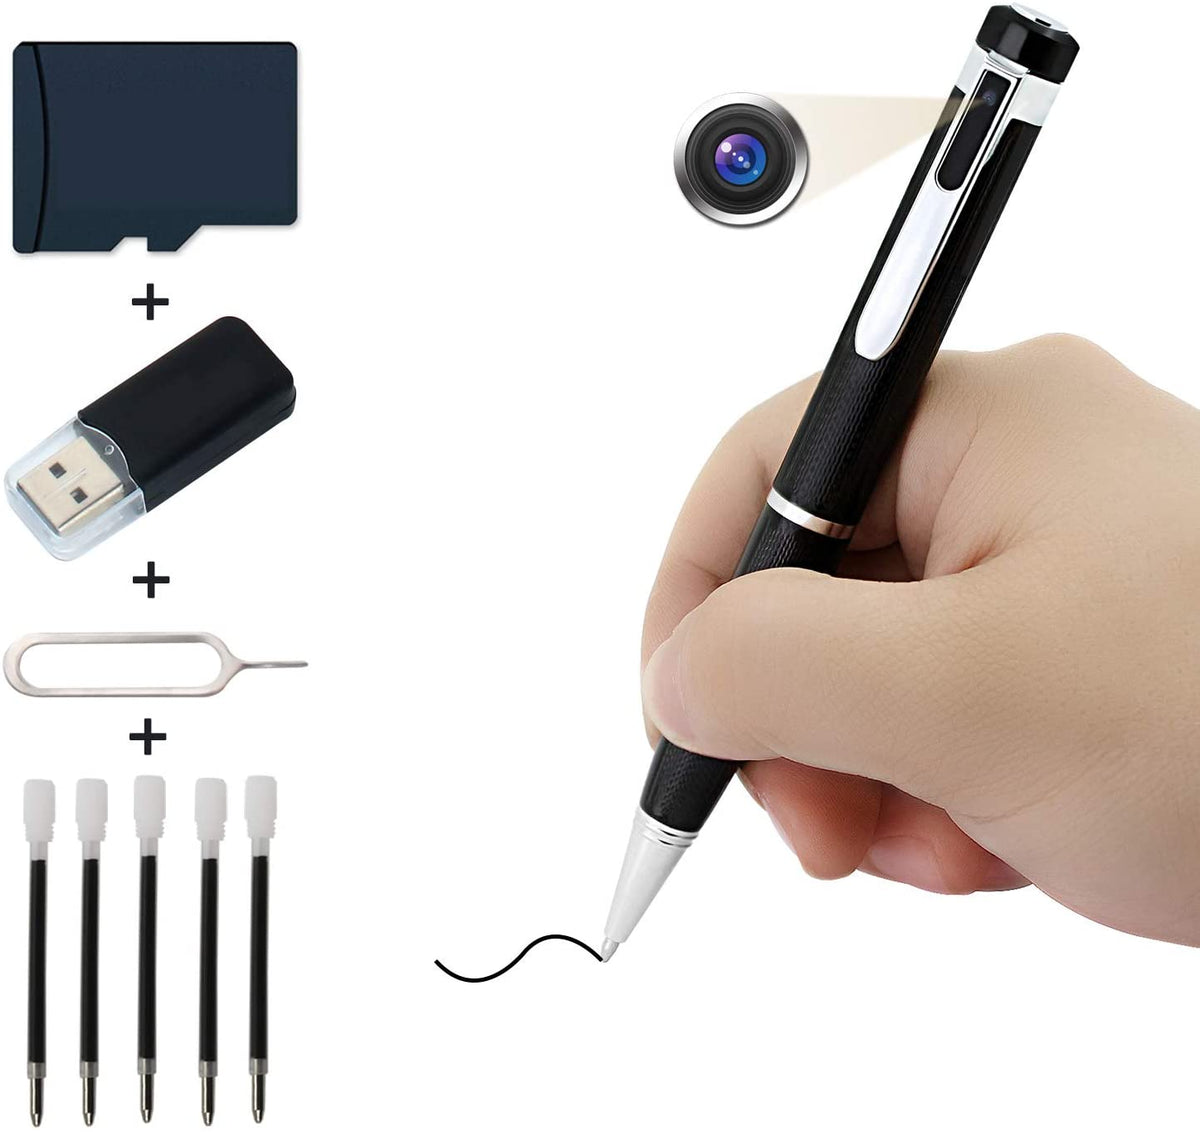 Kaleser 1080P HD Pen Camera Video with 32GB Memory Card for Home and Office Security, Mini Pen Camera